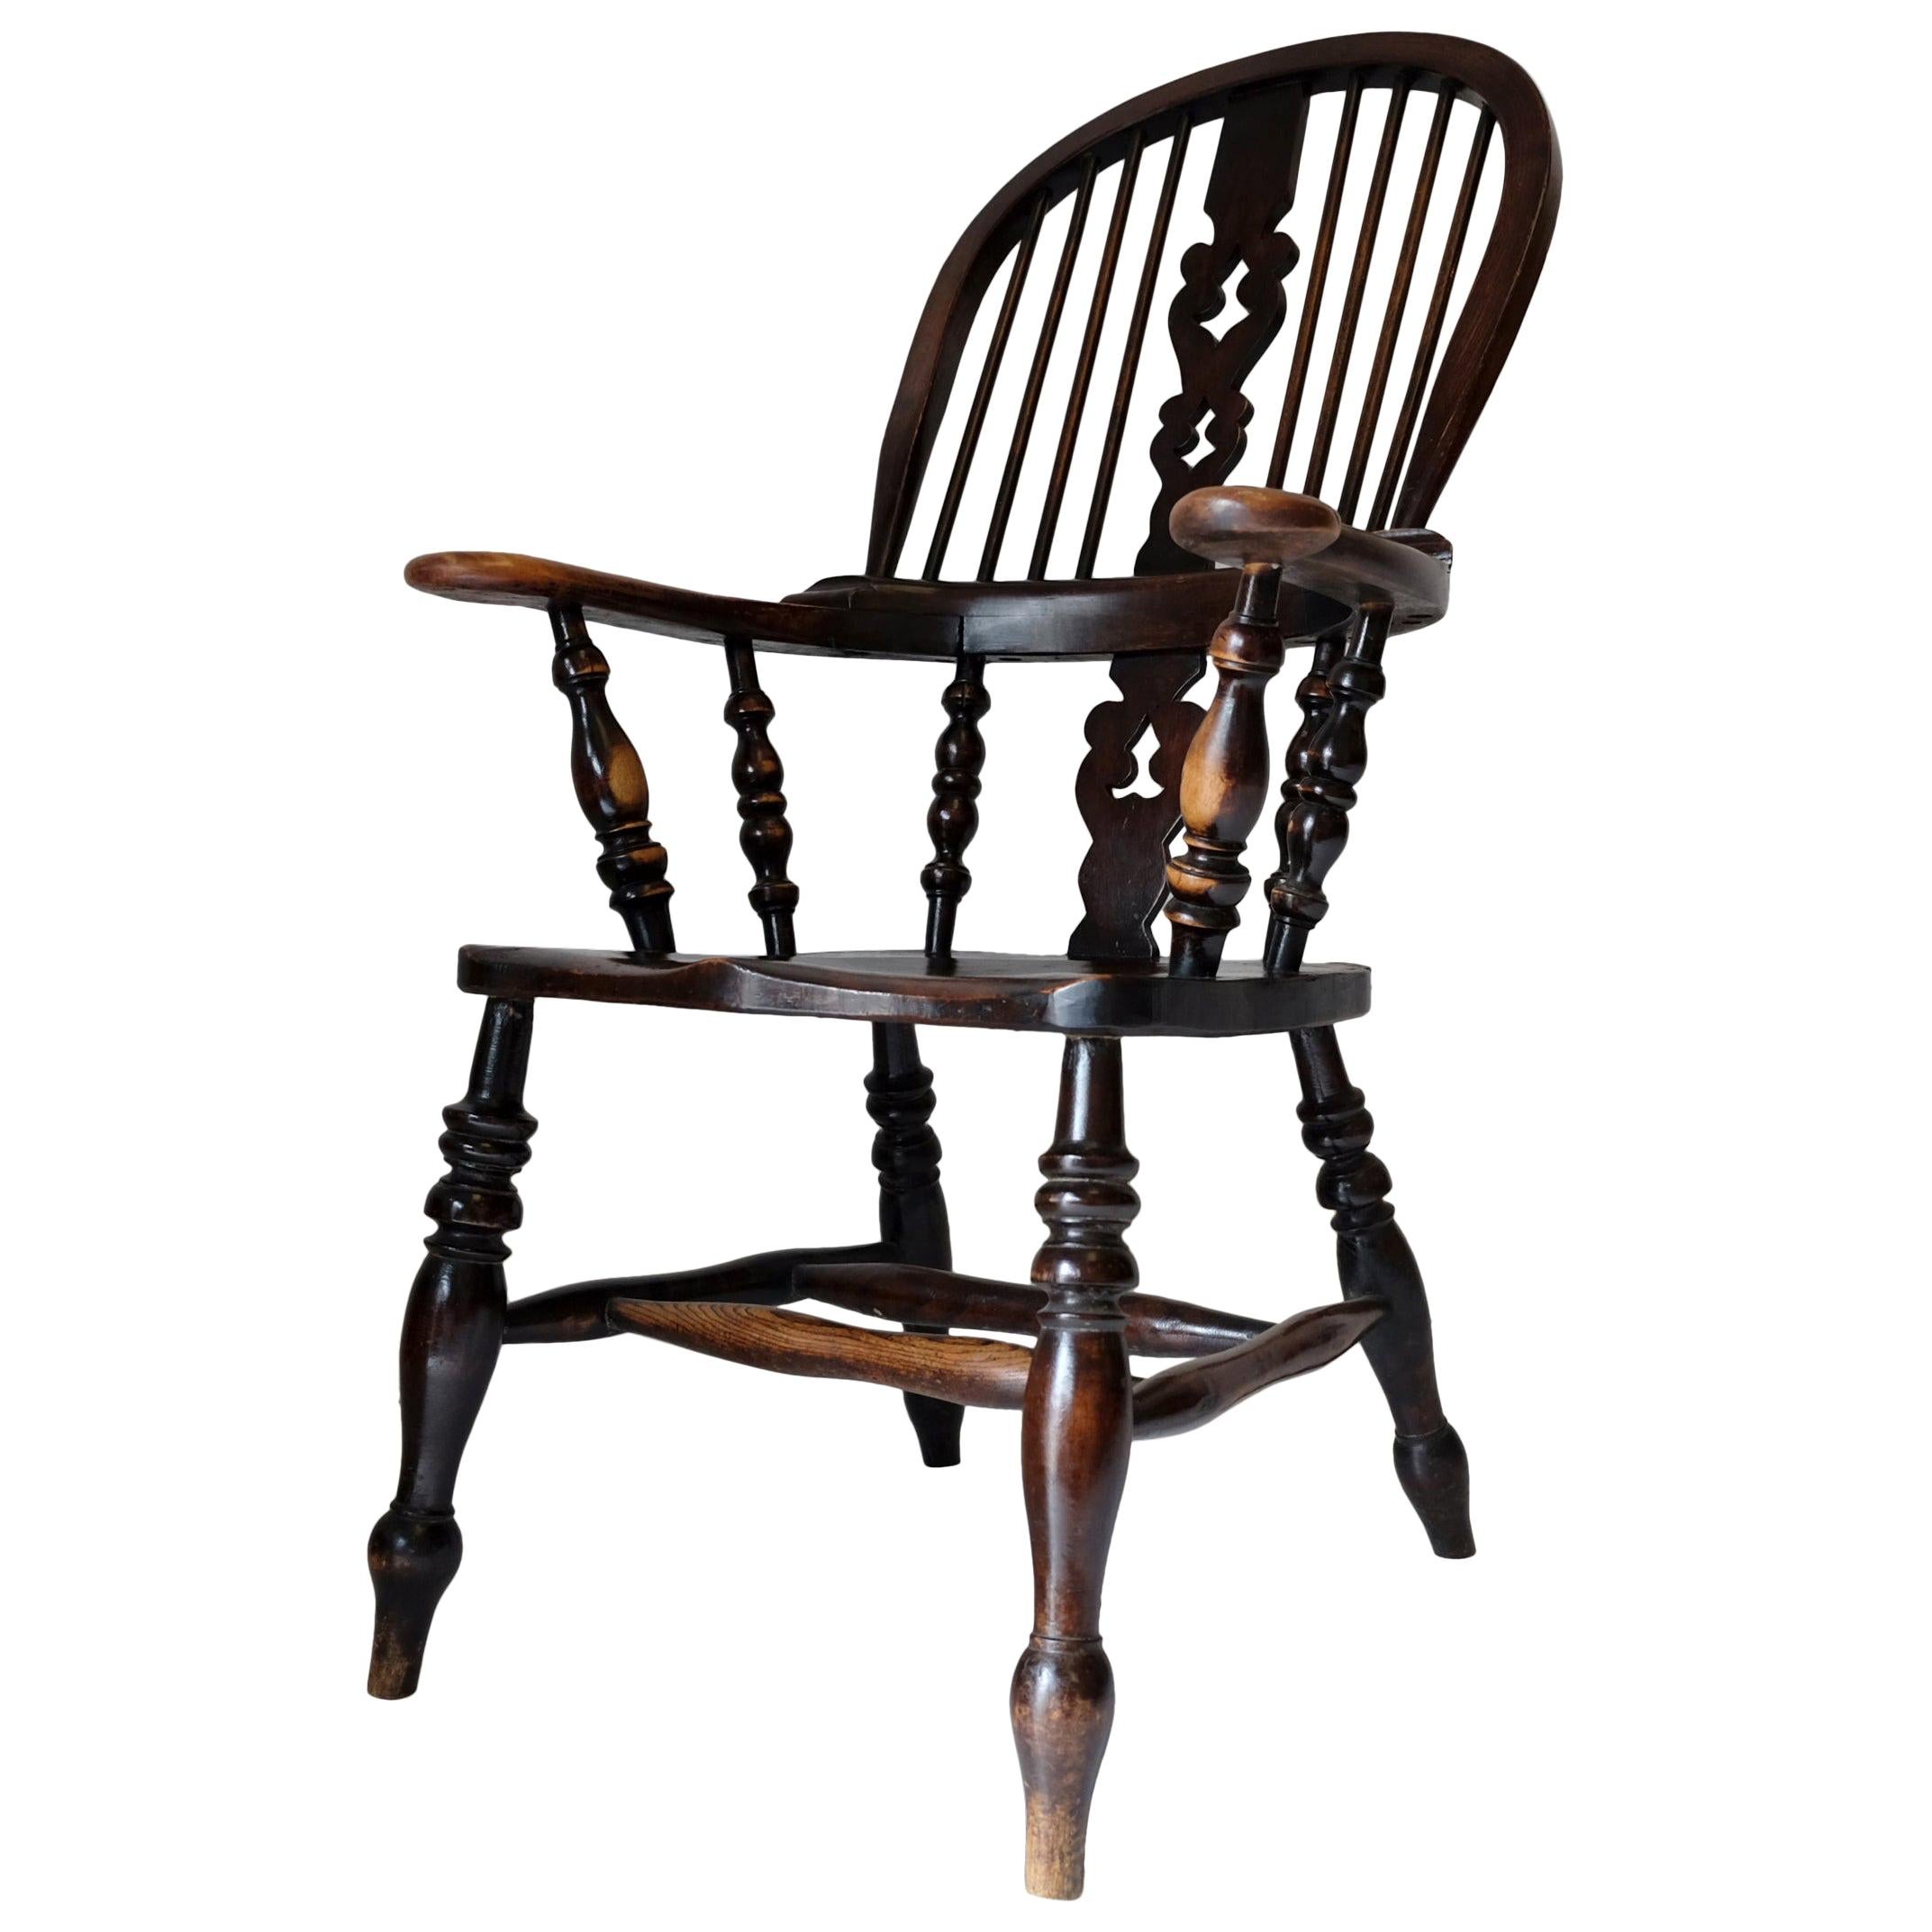 English Broad Arm Windsor Chair, 19th Century, Alder, Large, Yorkshire Country